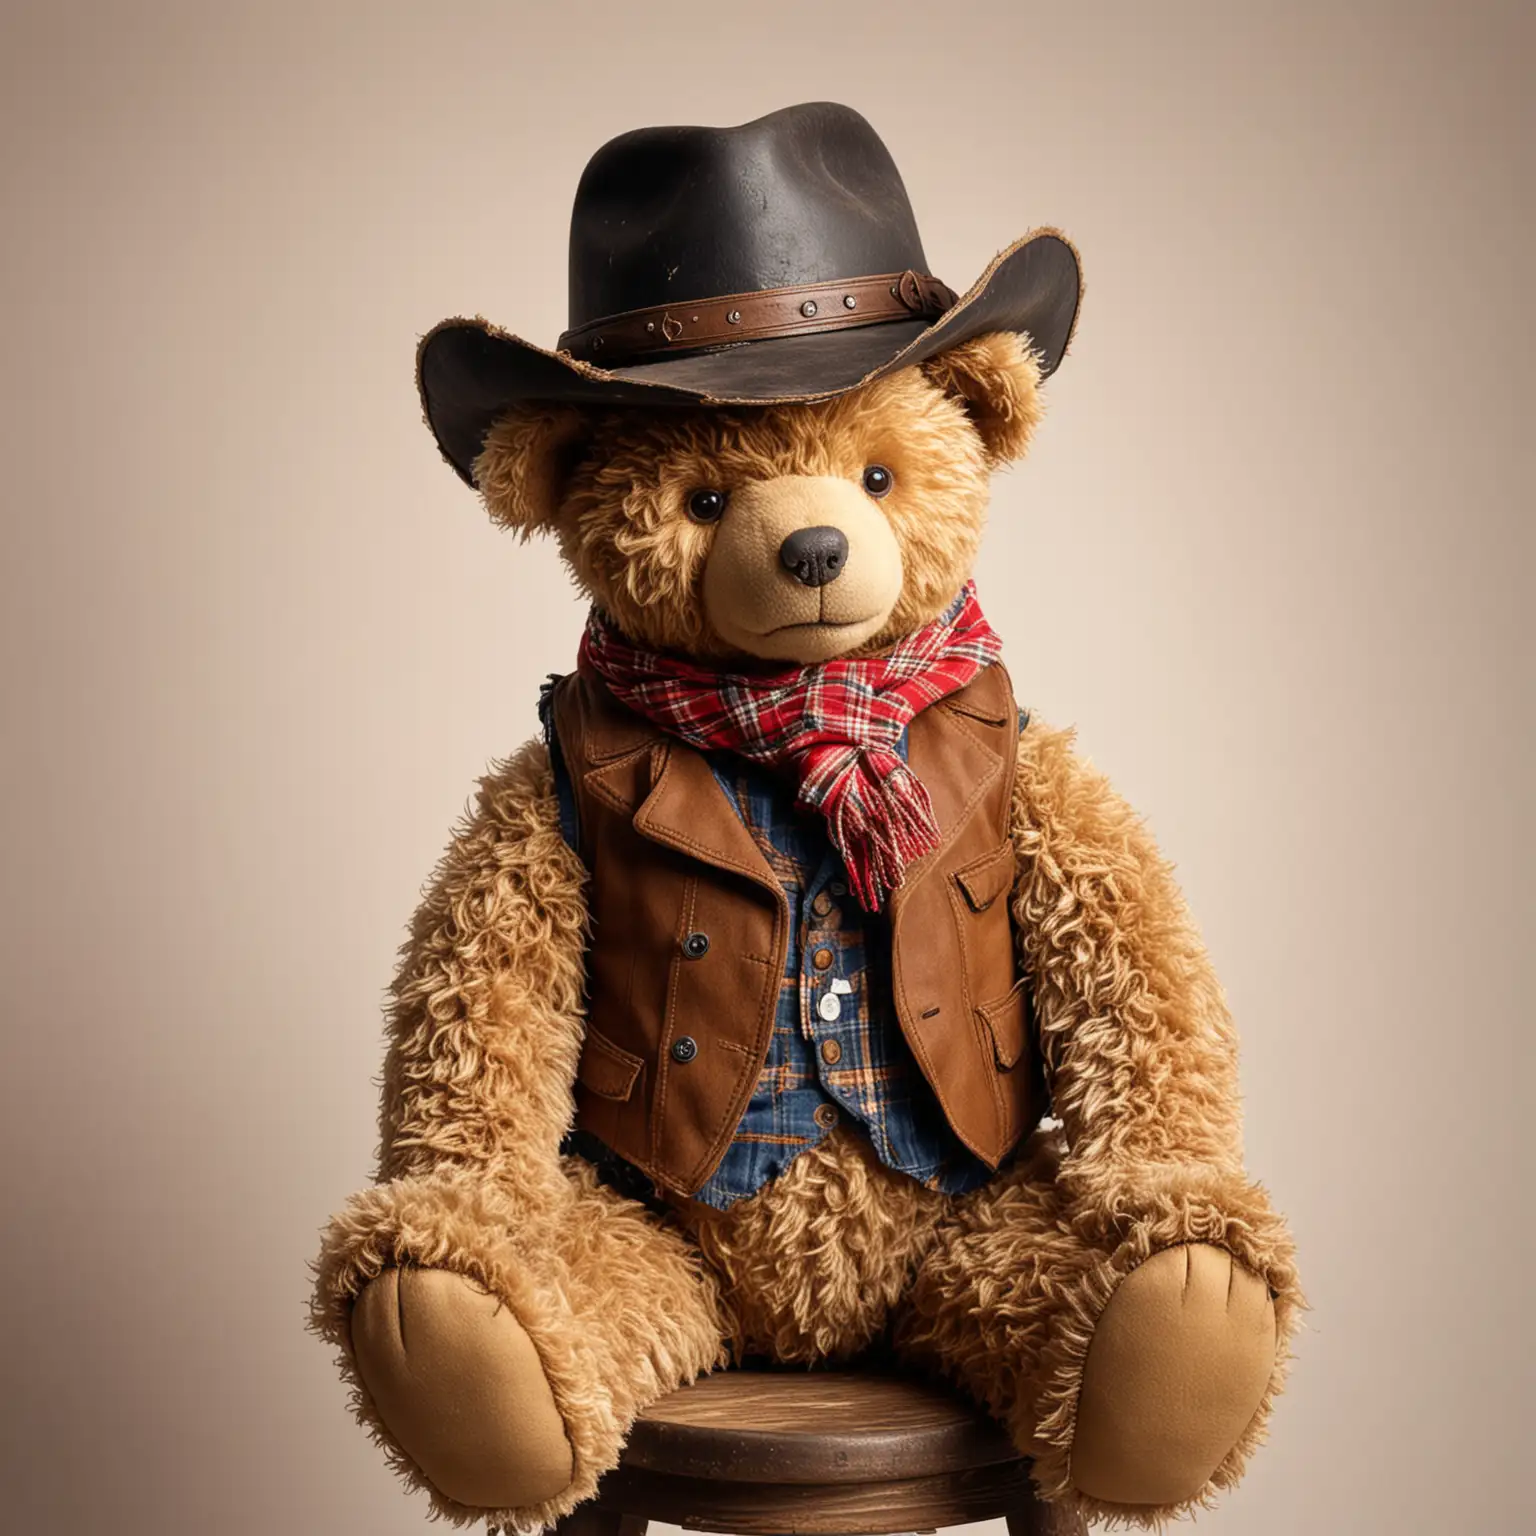 Battered old vintage Teddy Bear, sitting on a stool, dressed as a cowboy with hat, scarf, waistcoat, blank background